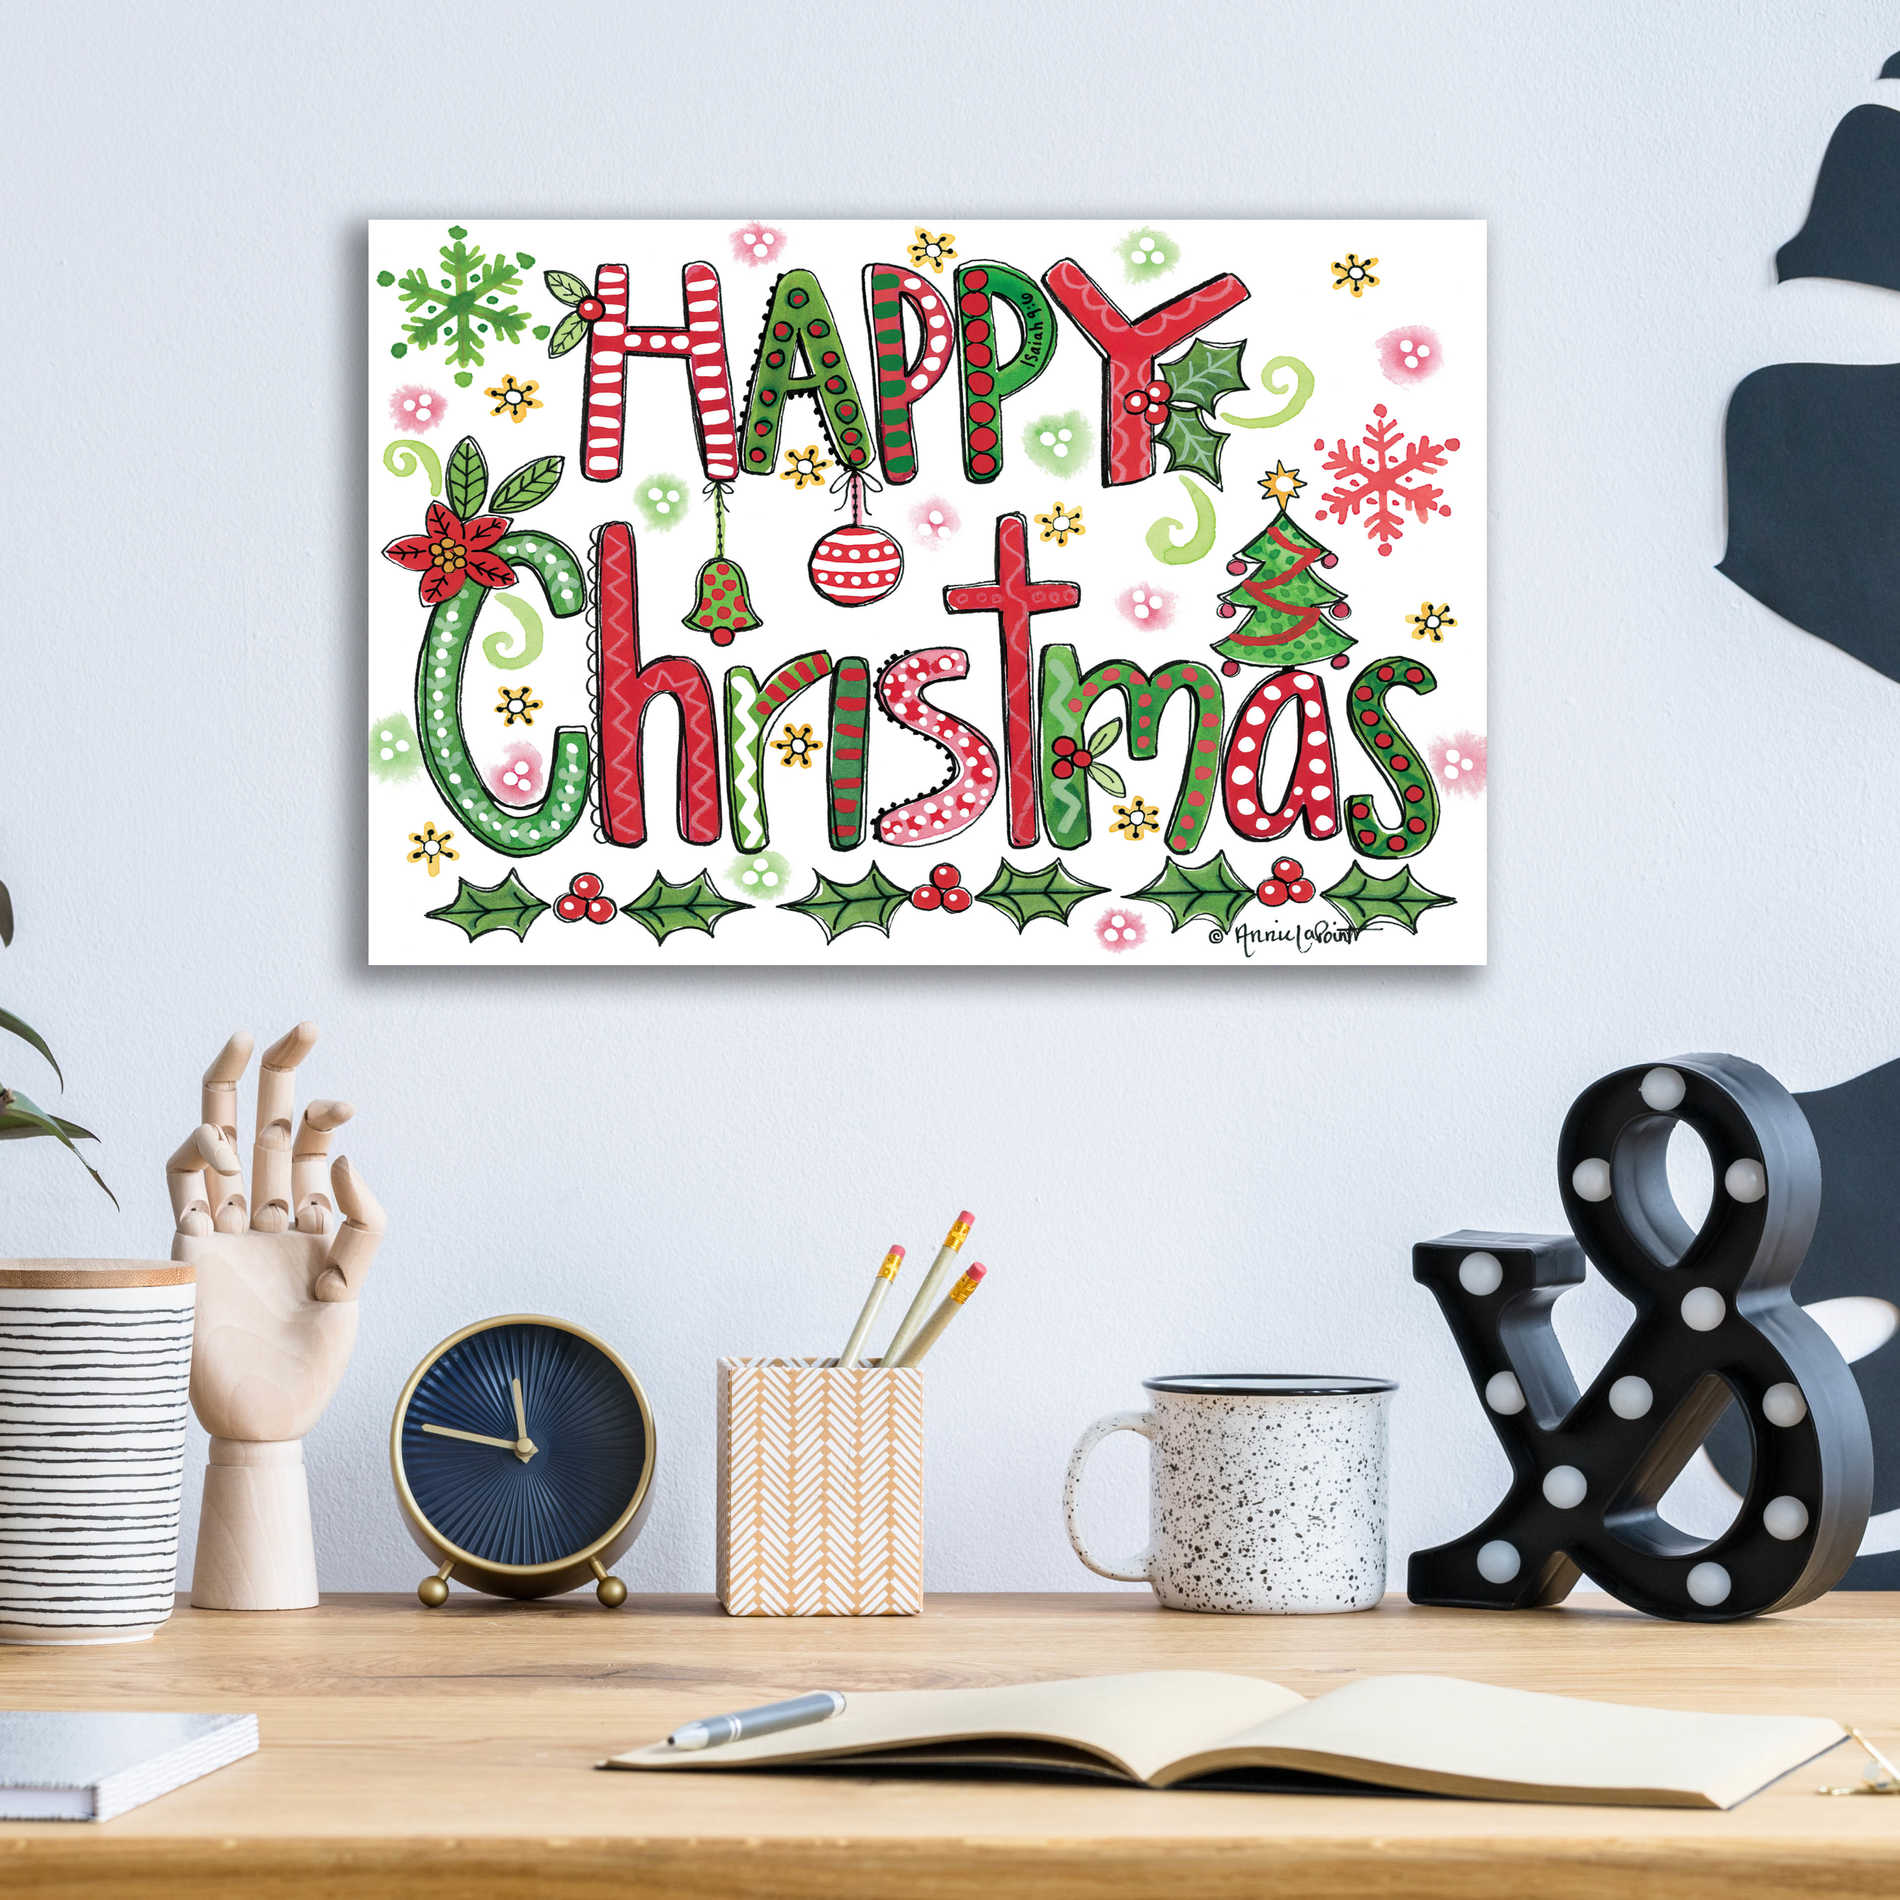 Epic Art 'Happy Christmas' by Annie LaPoint, Acrylic Glass Wall Art,16x12